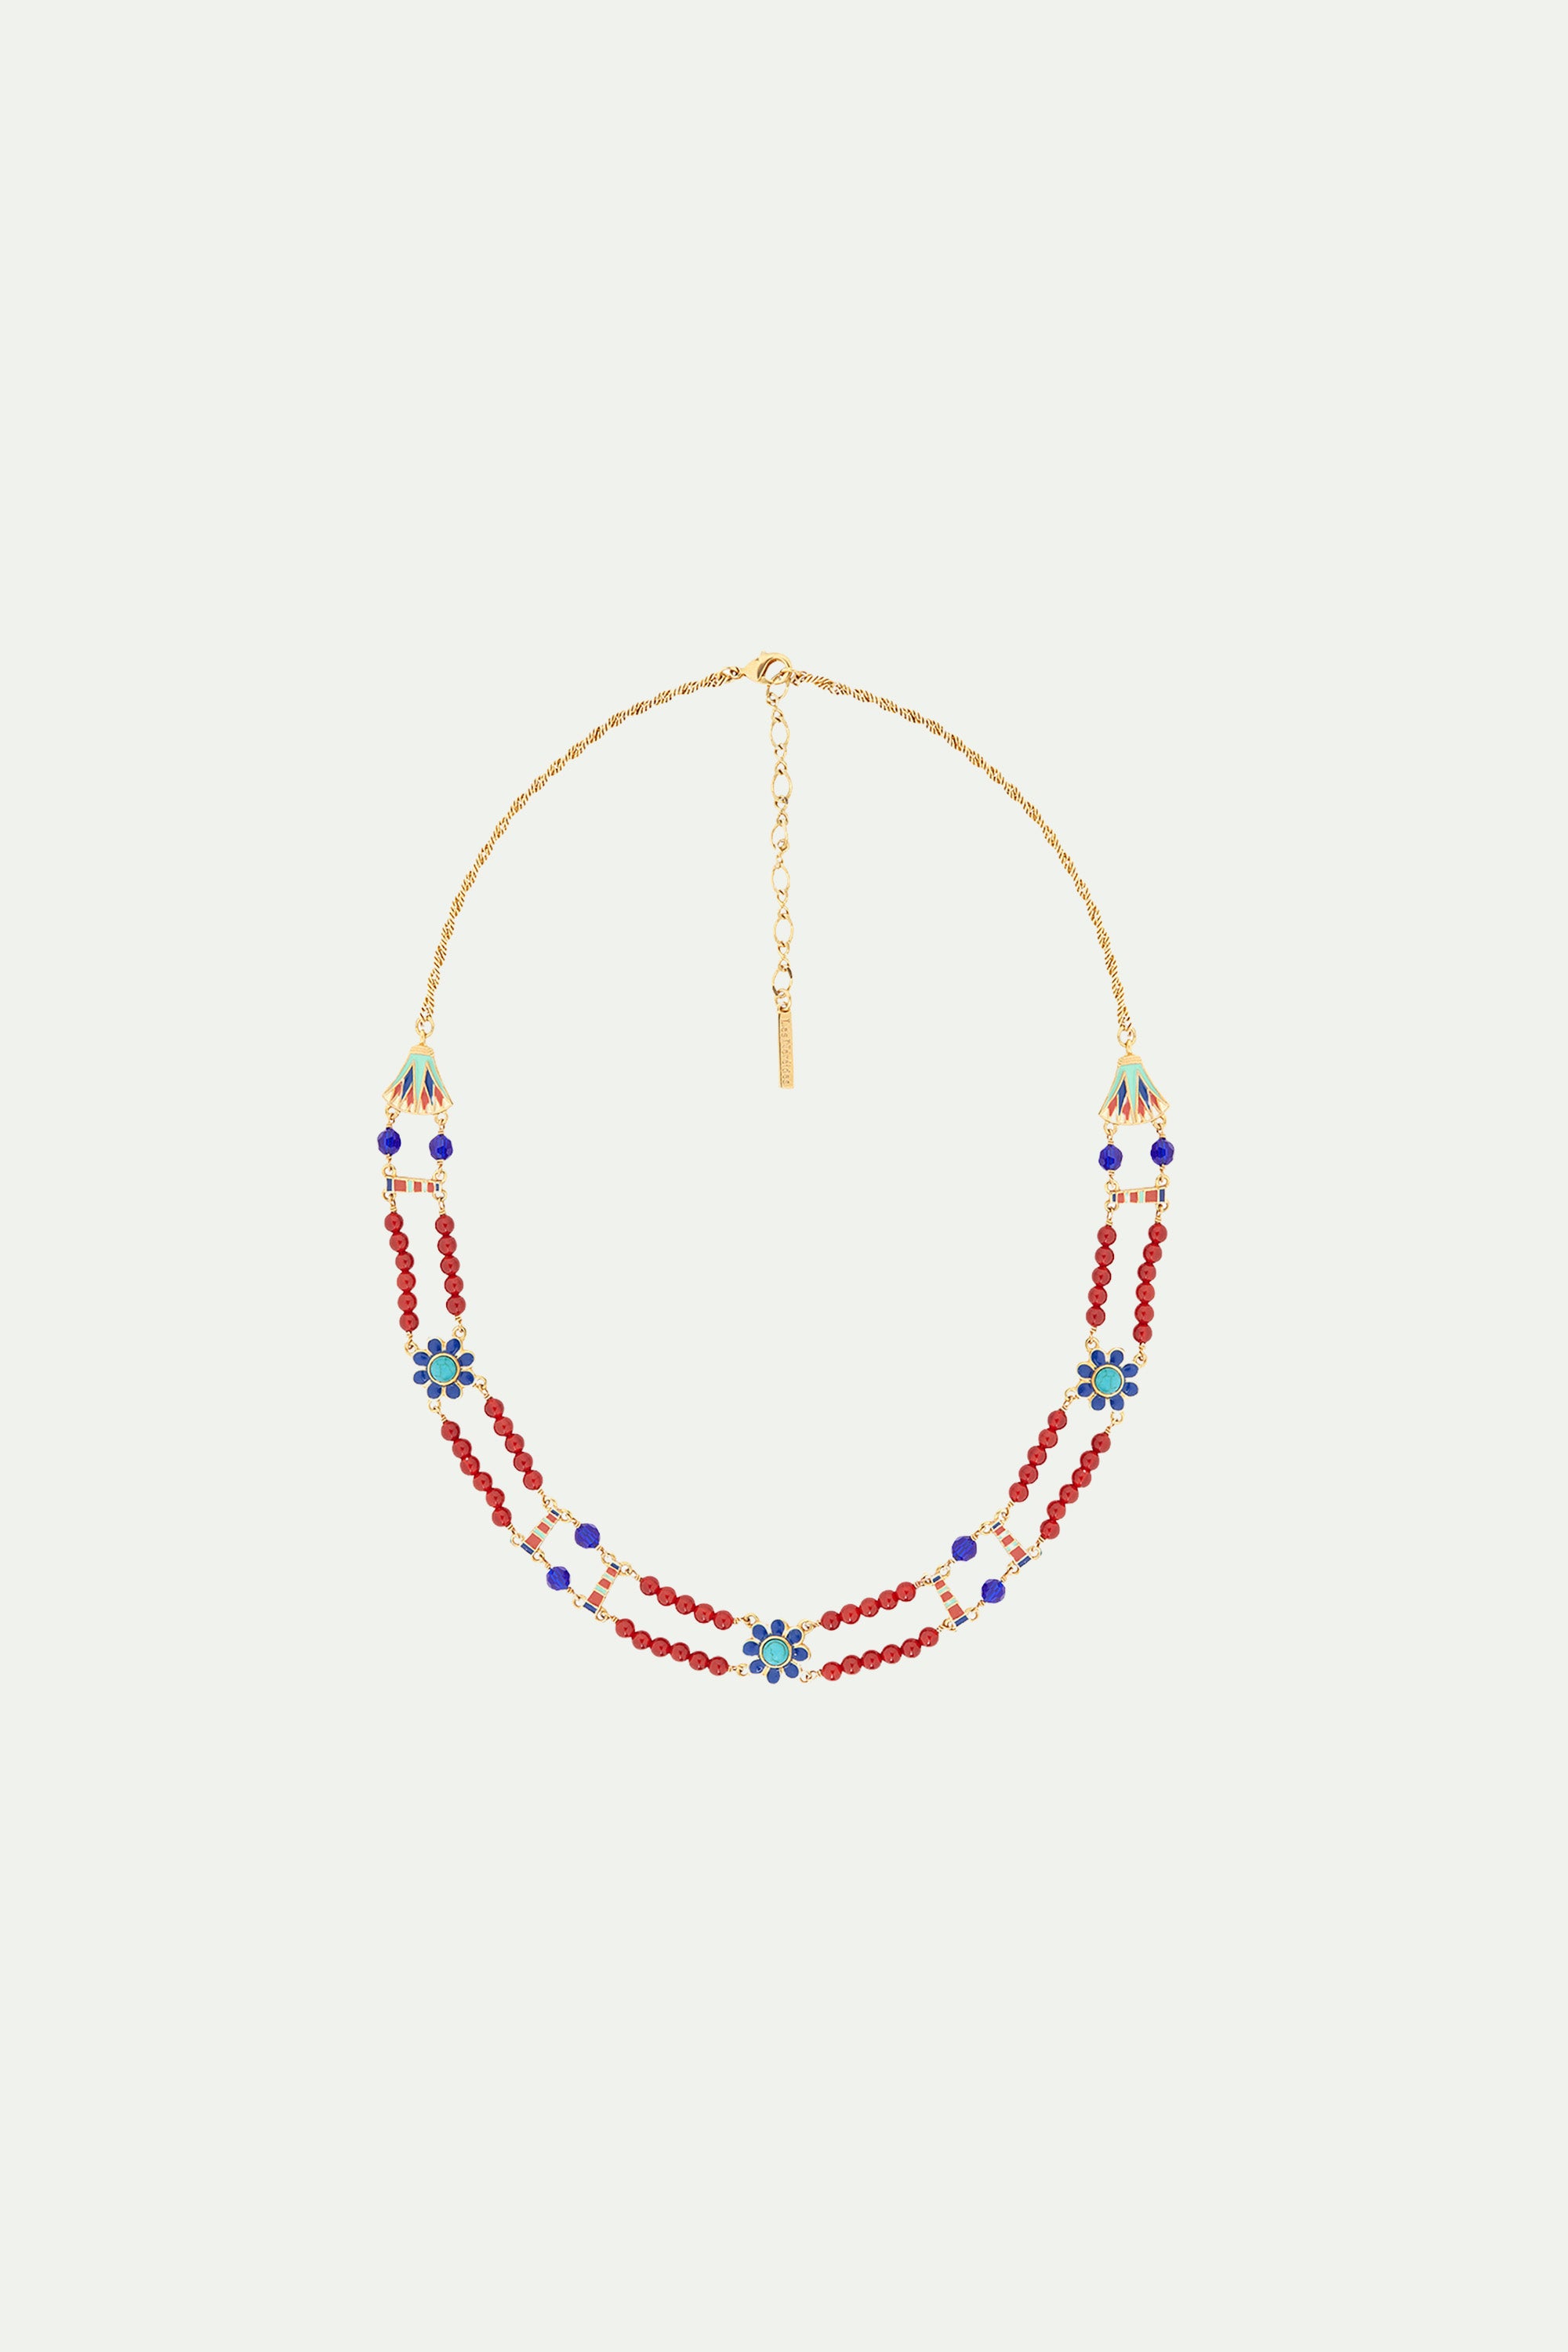 Mystery of the Nile statement necklace